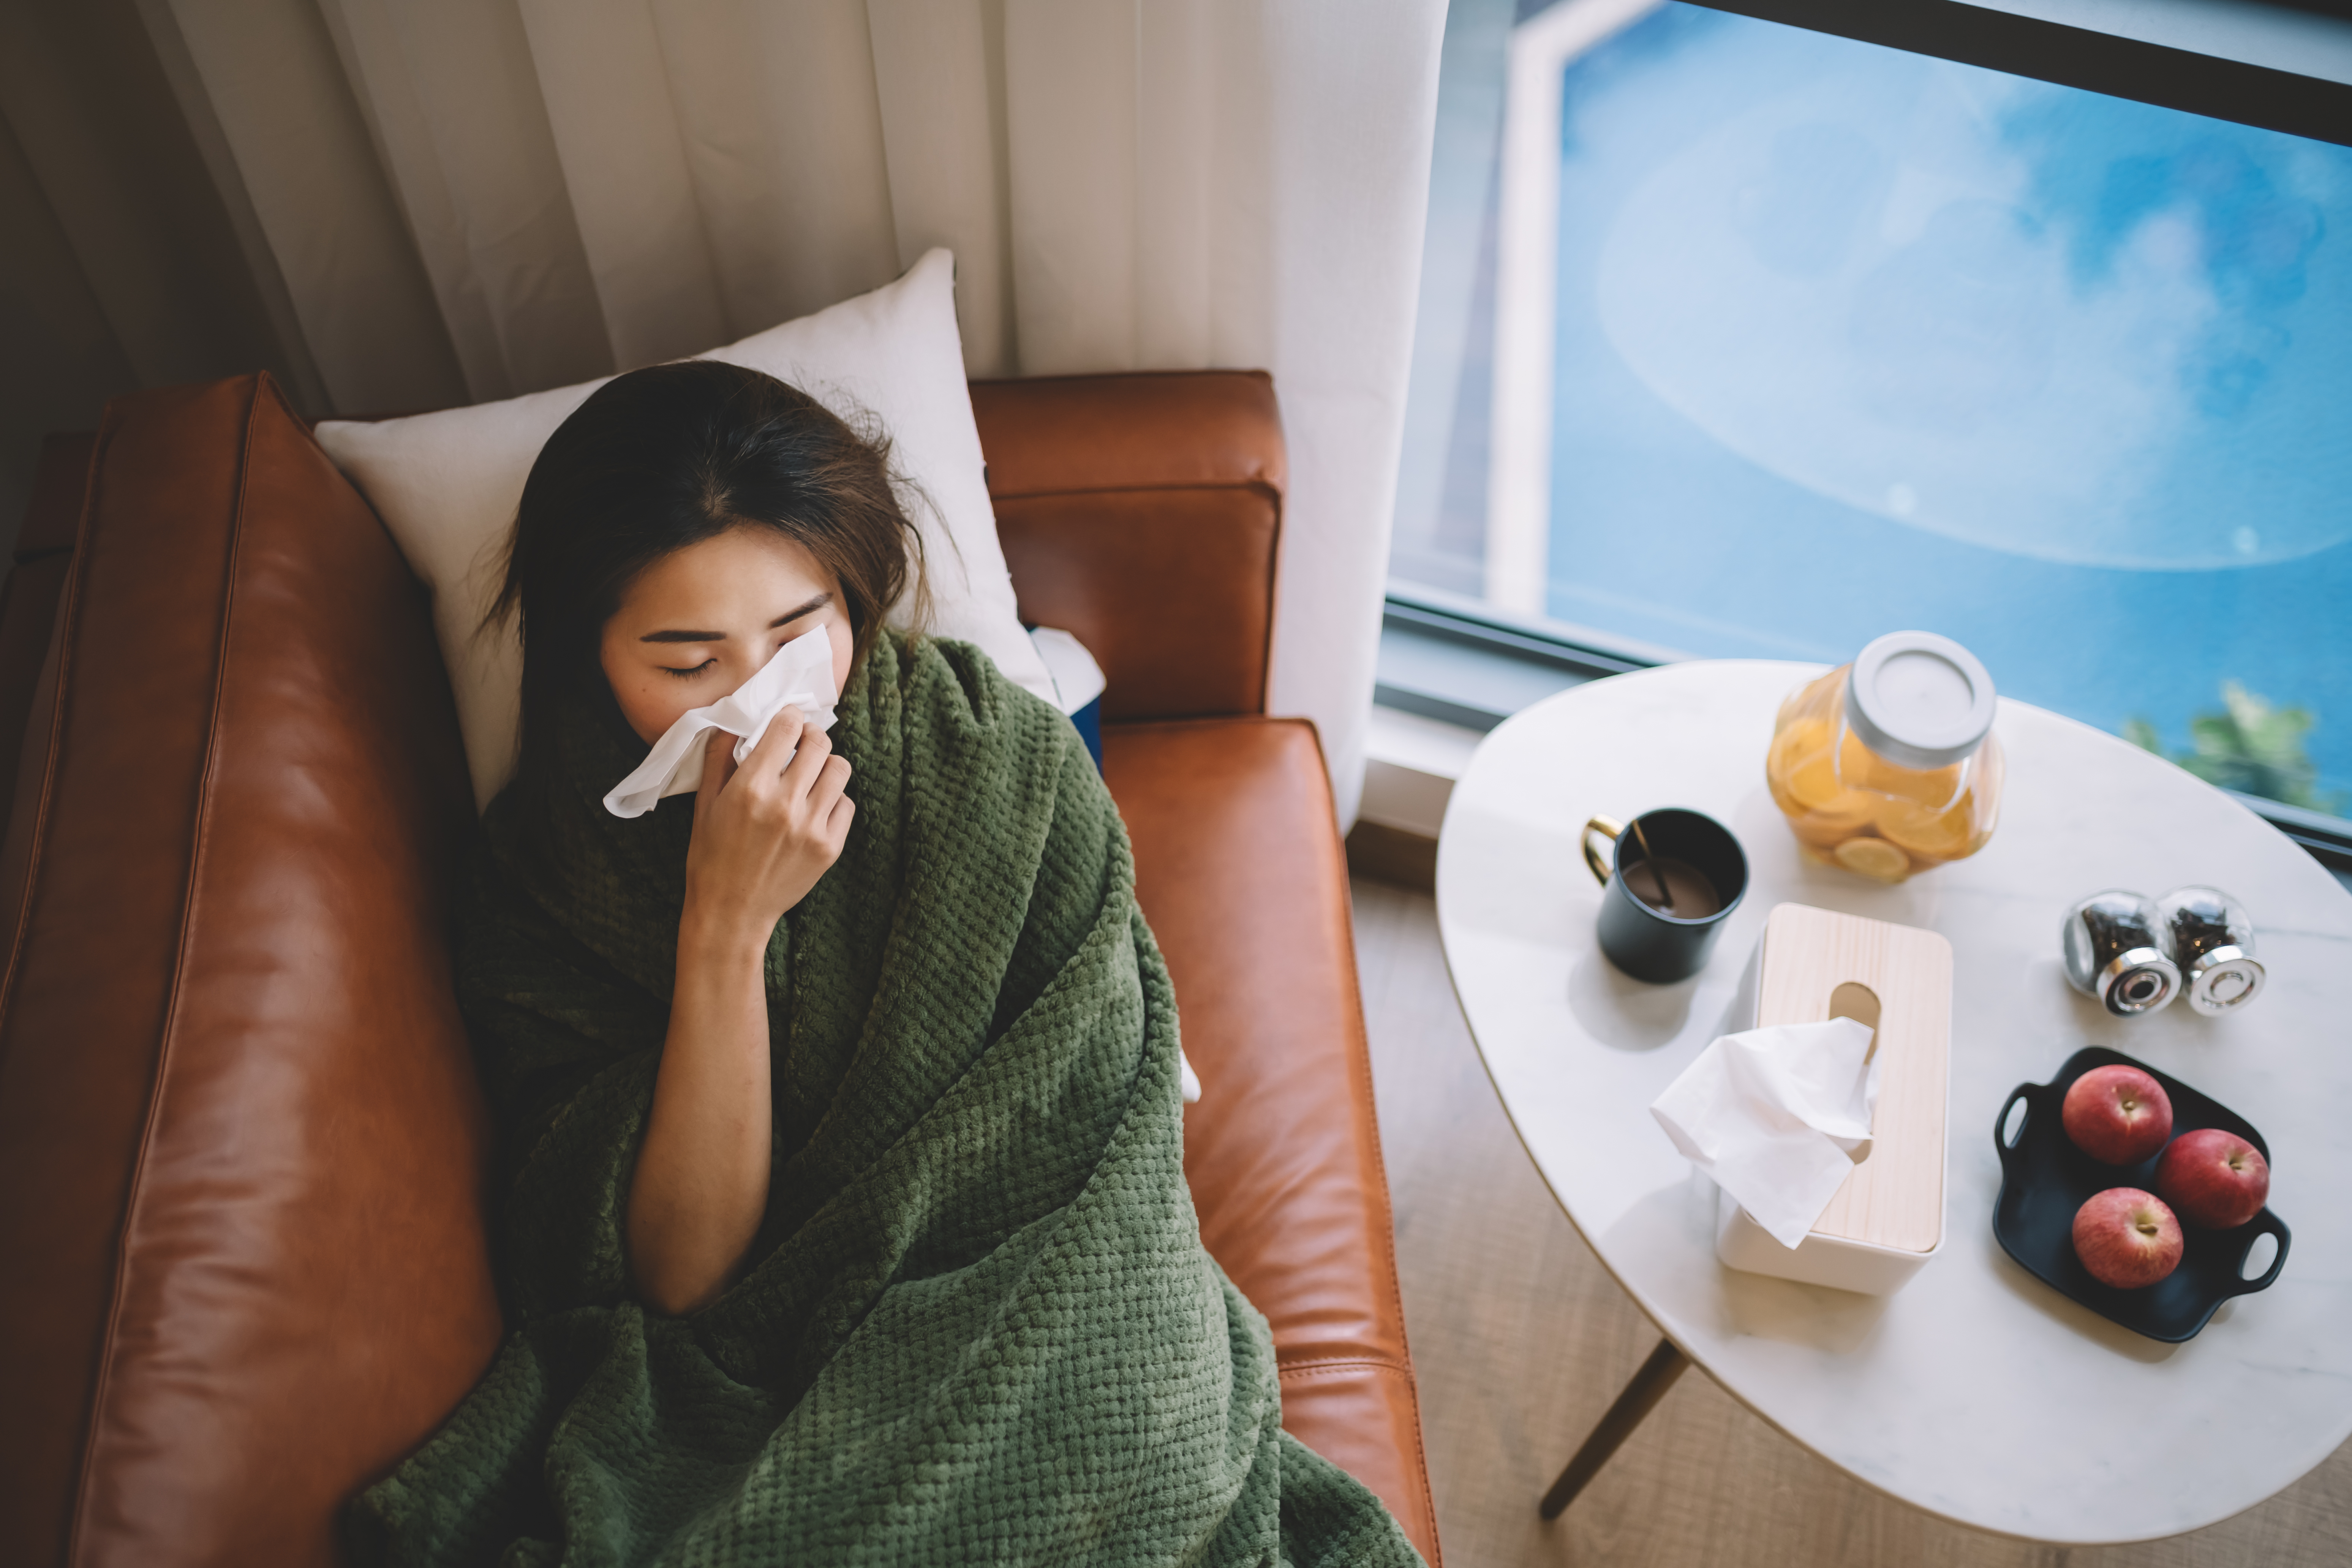 If you're feeling sick and self care measures aren't helping, call 402.472.5000 to schedule an appointment at the University Health Center.